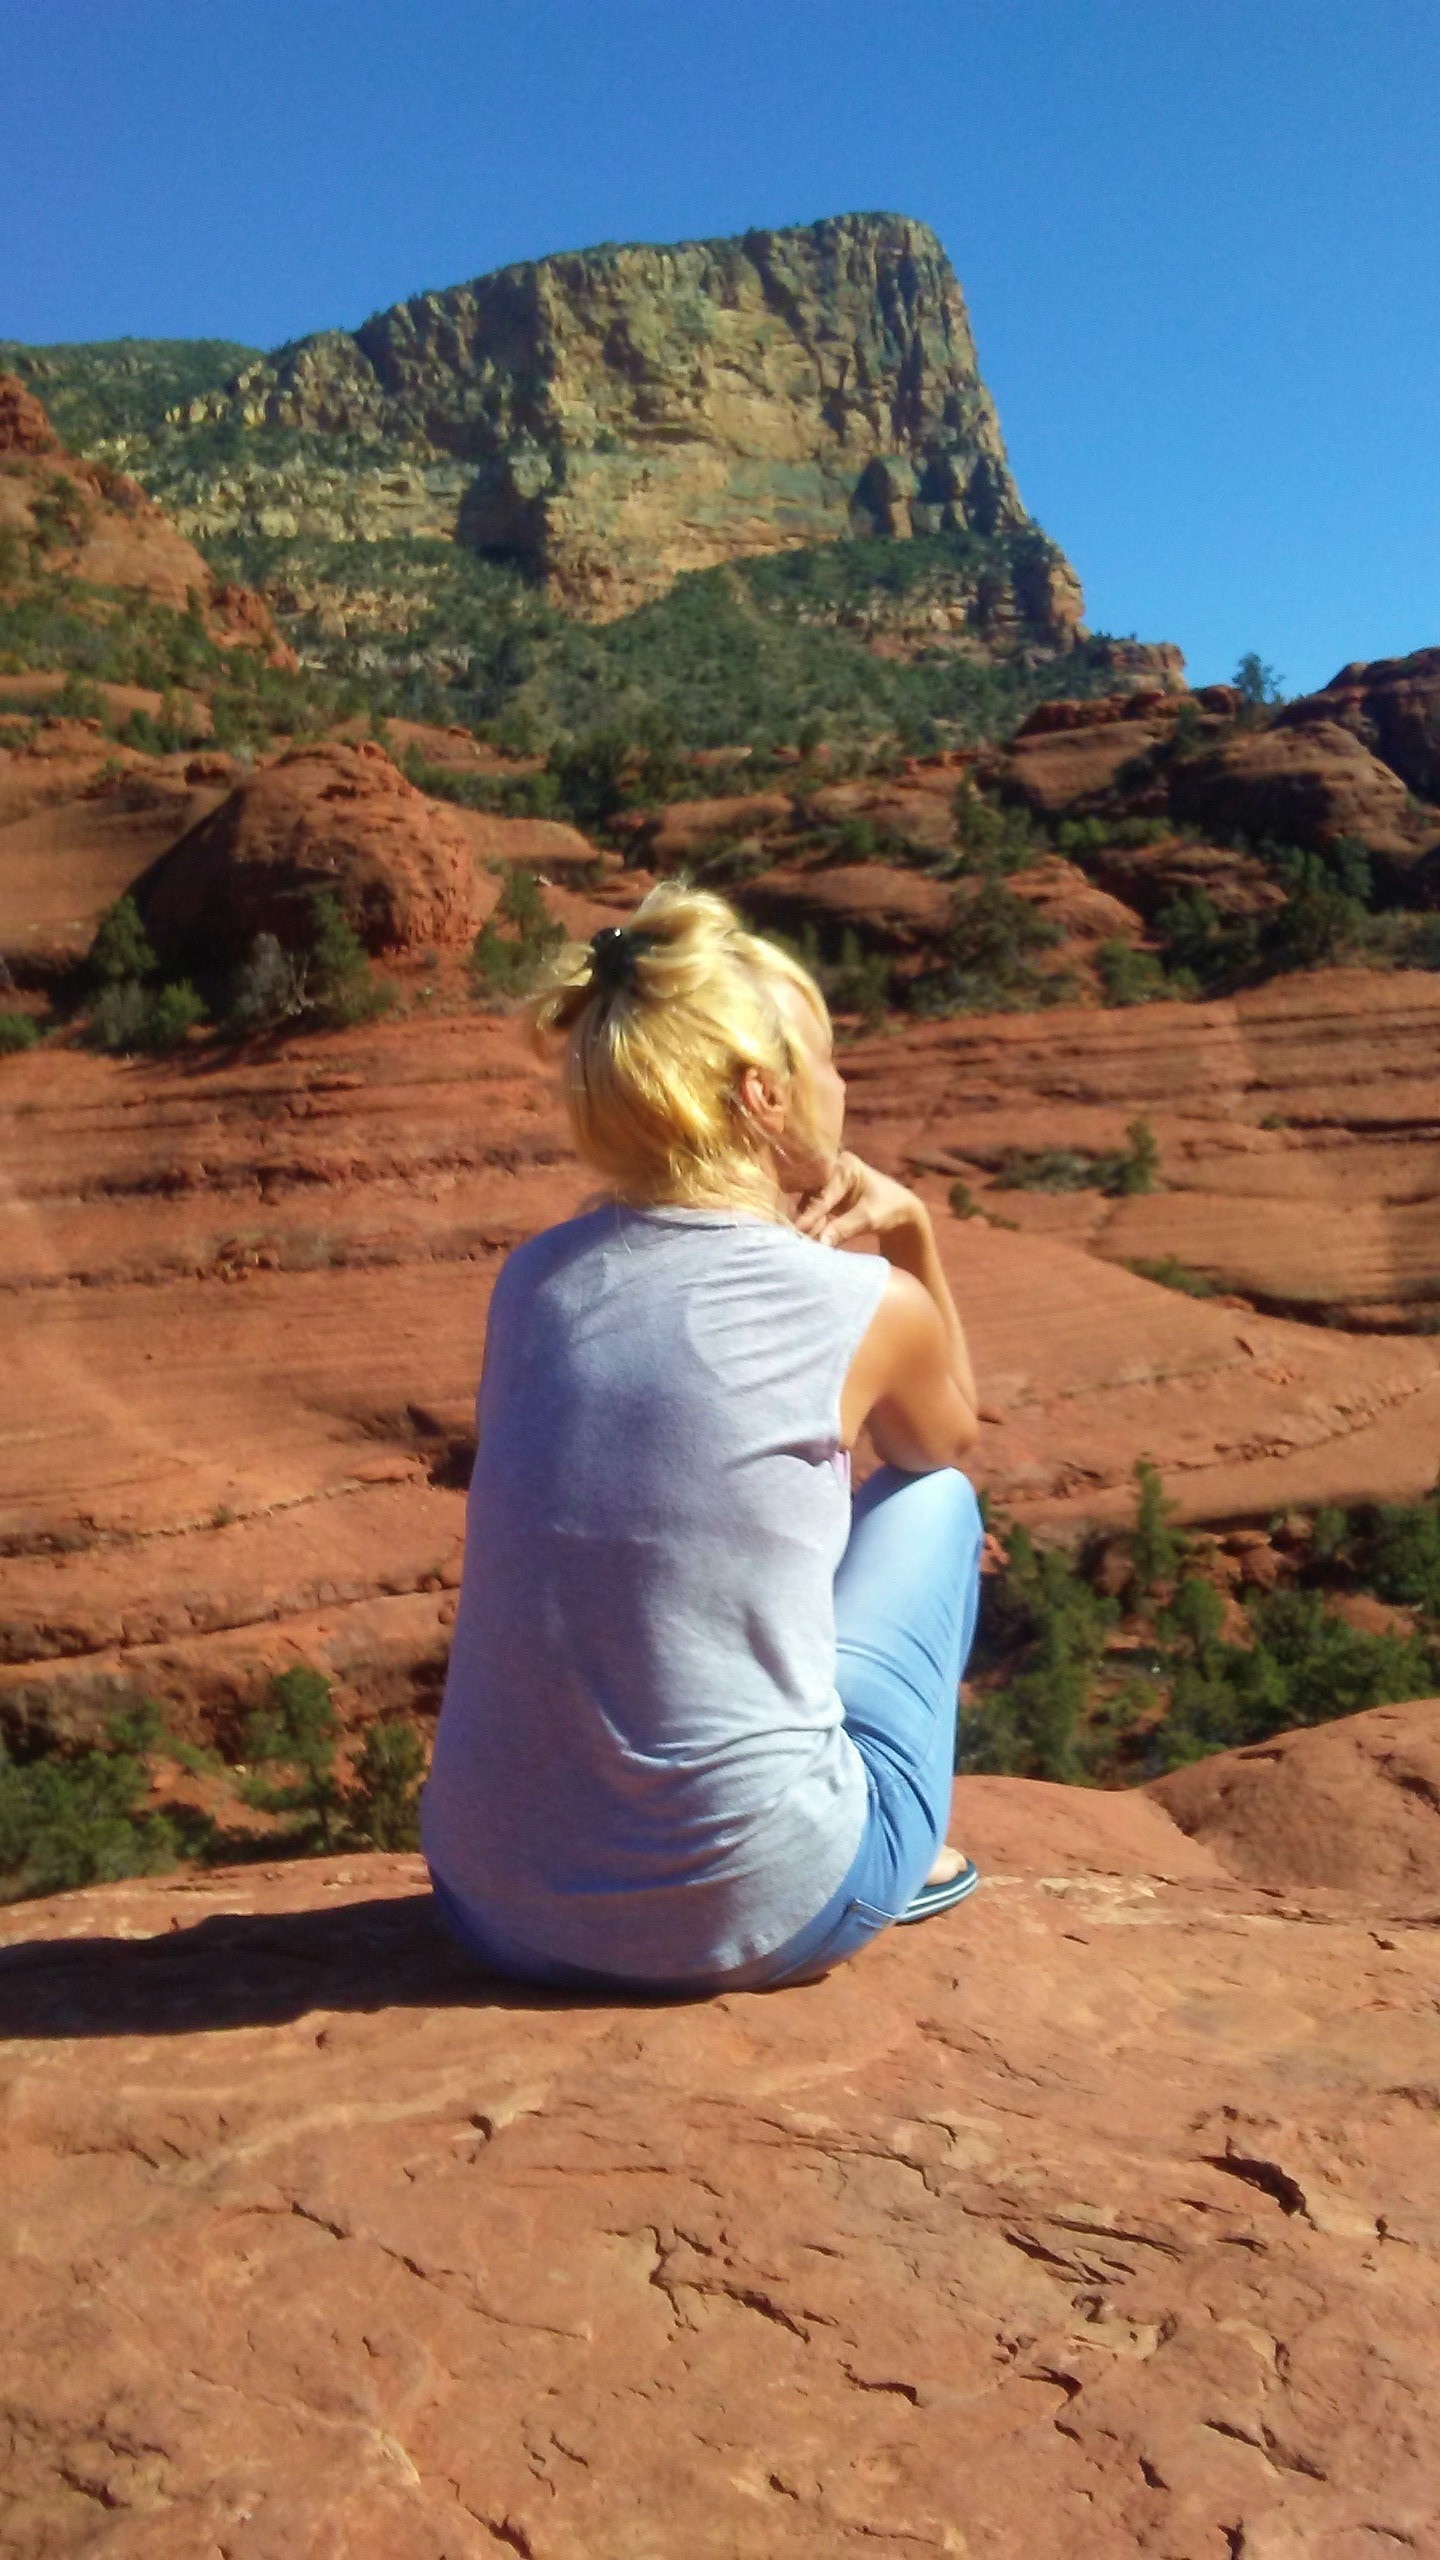 #OrbitzTravel

Lots to ponder on these red rocks.